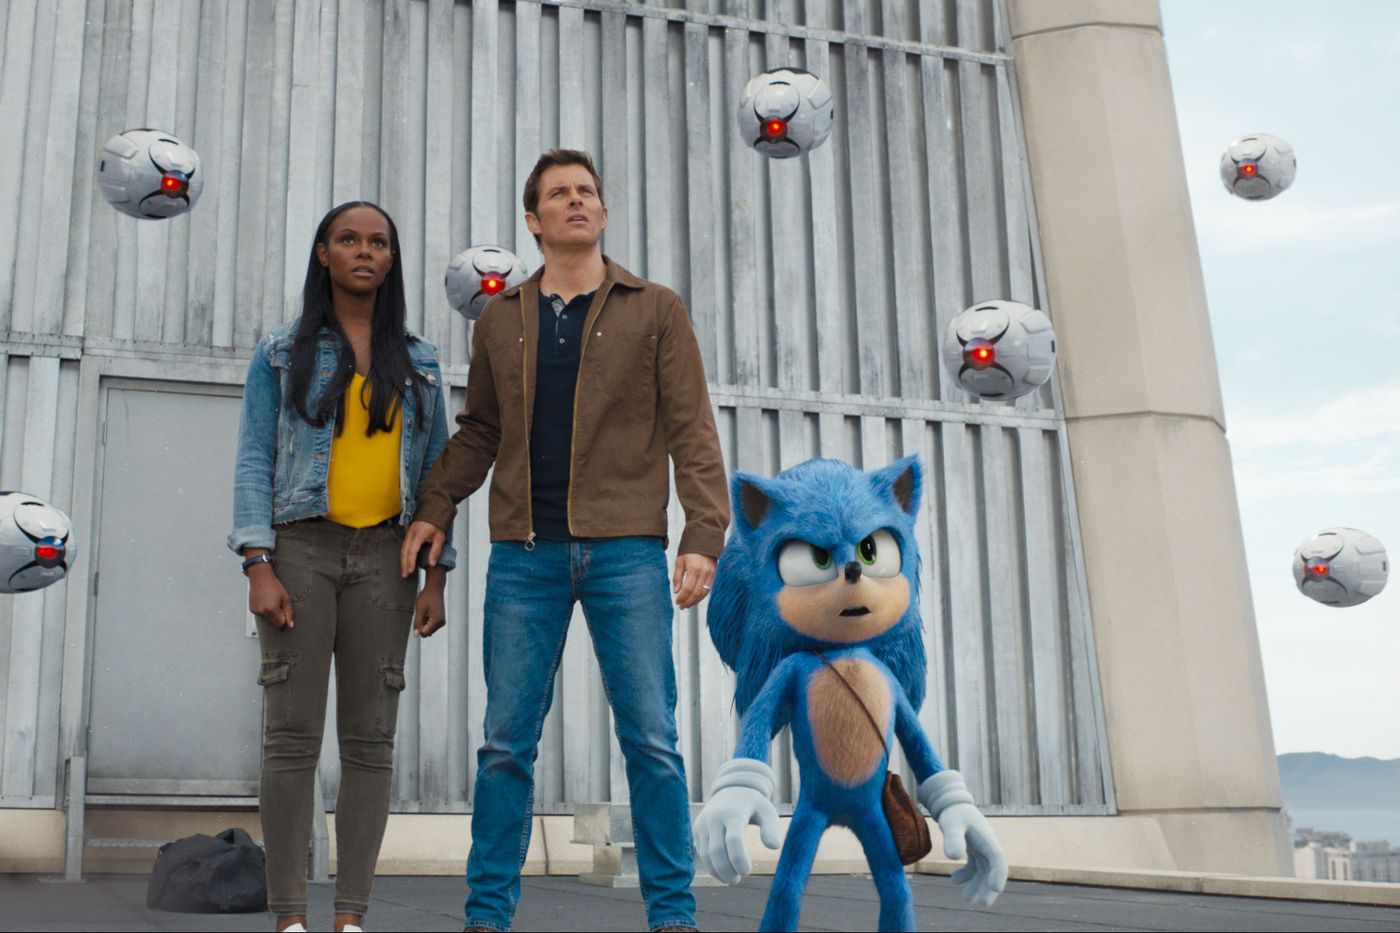 New 'Sonic the Hedgehog' movie poster unveiled and fans aren't happy